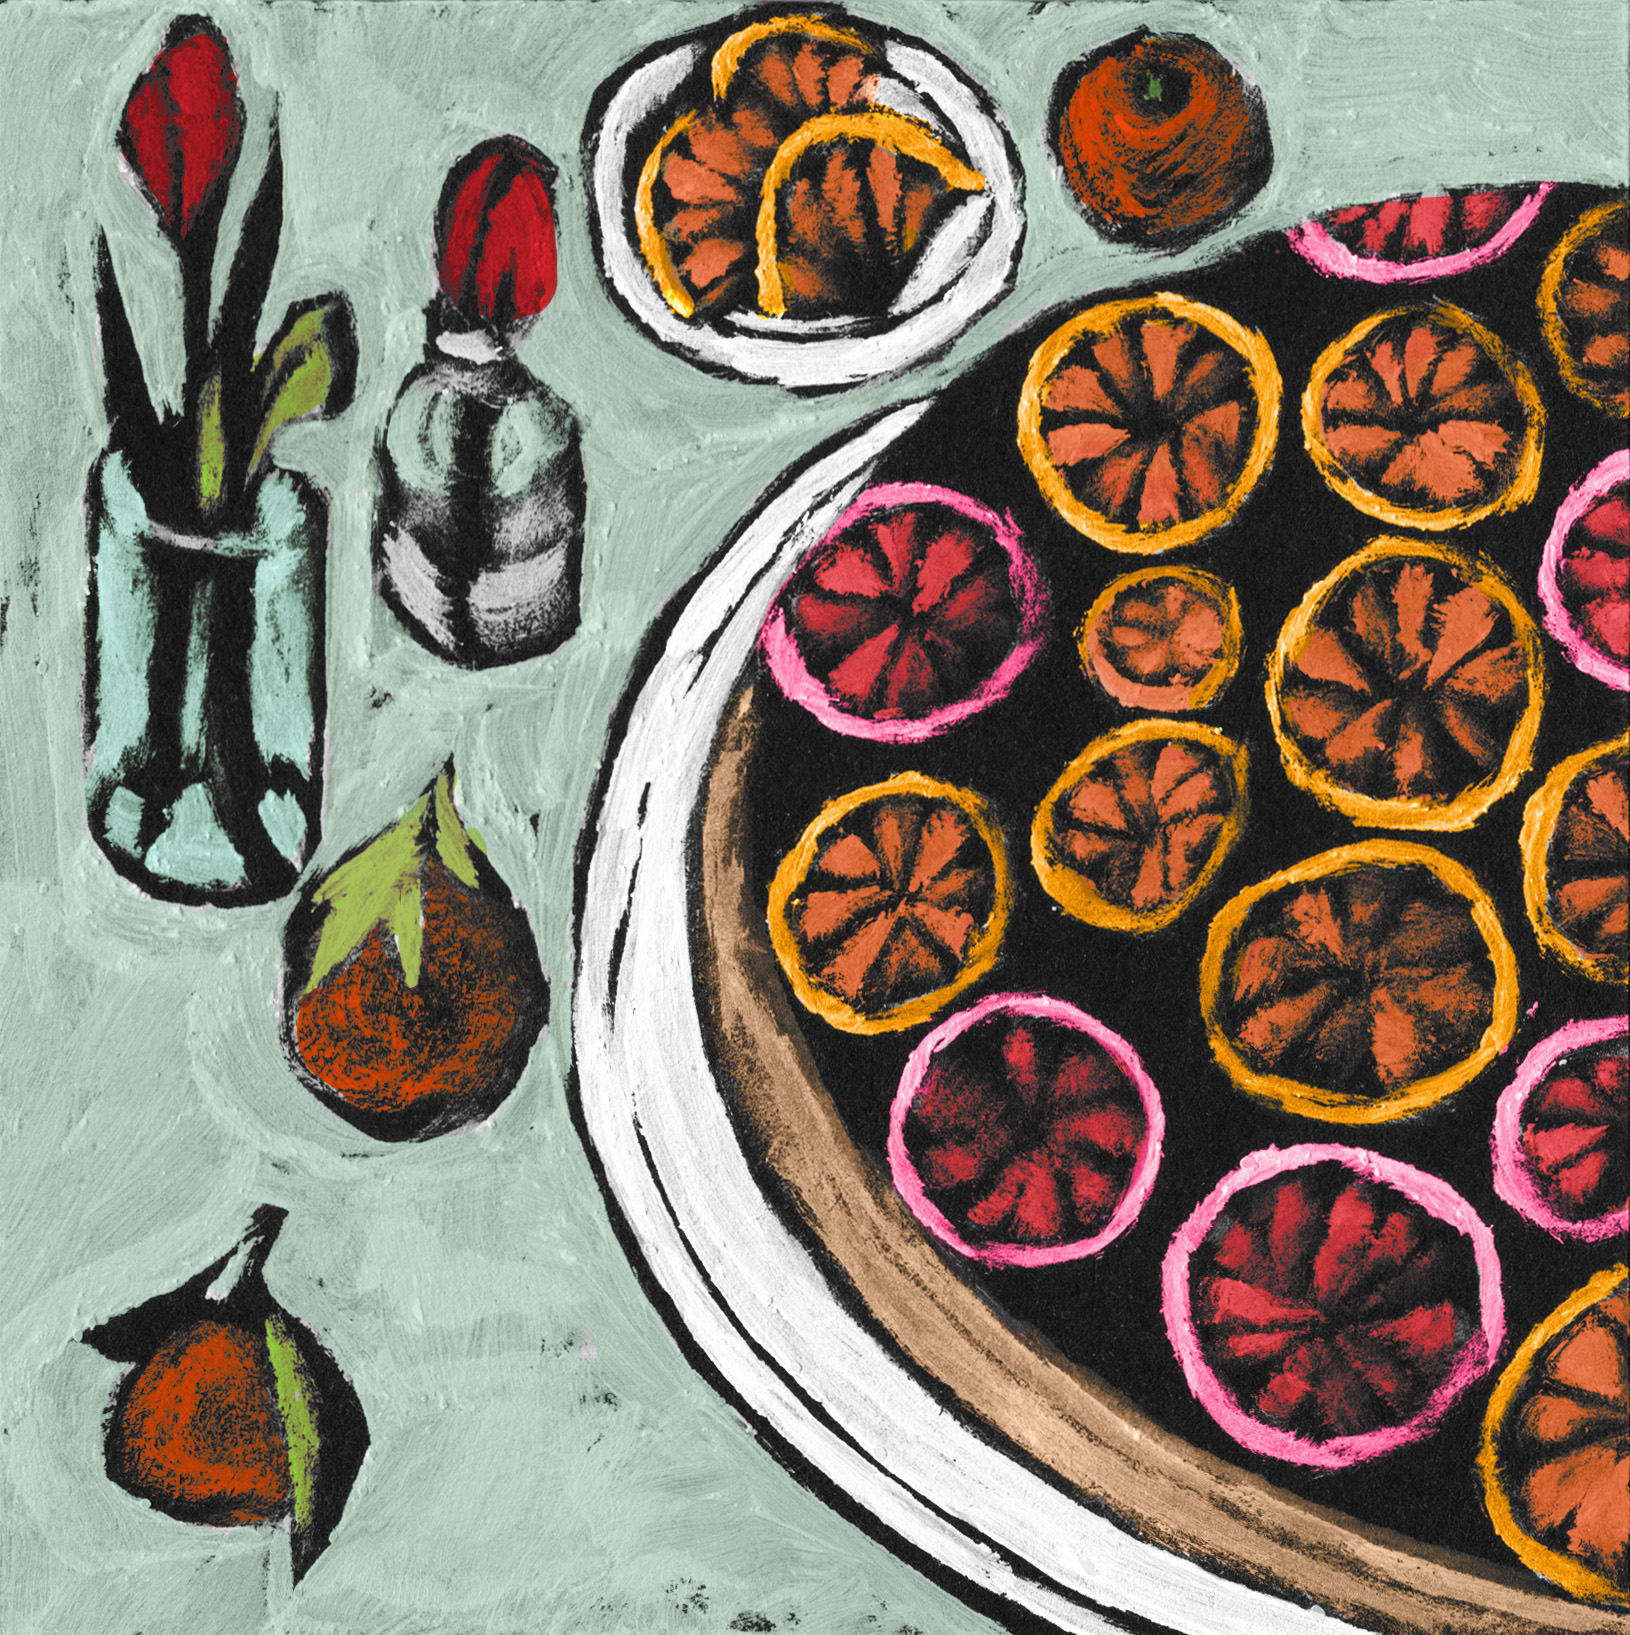 Hand drawn cookbook illustration of a cake and flowers on a table